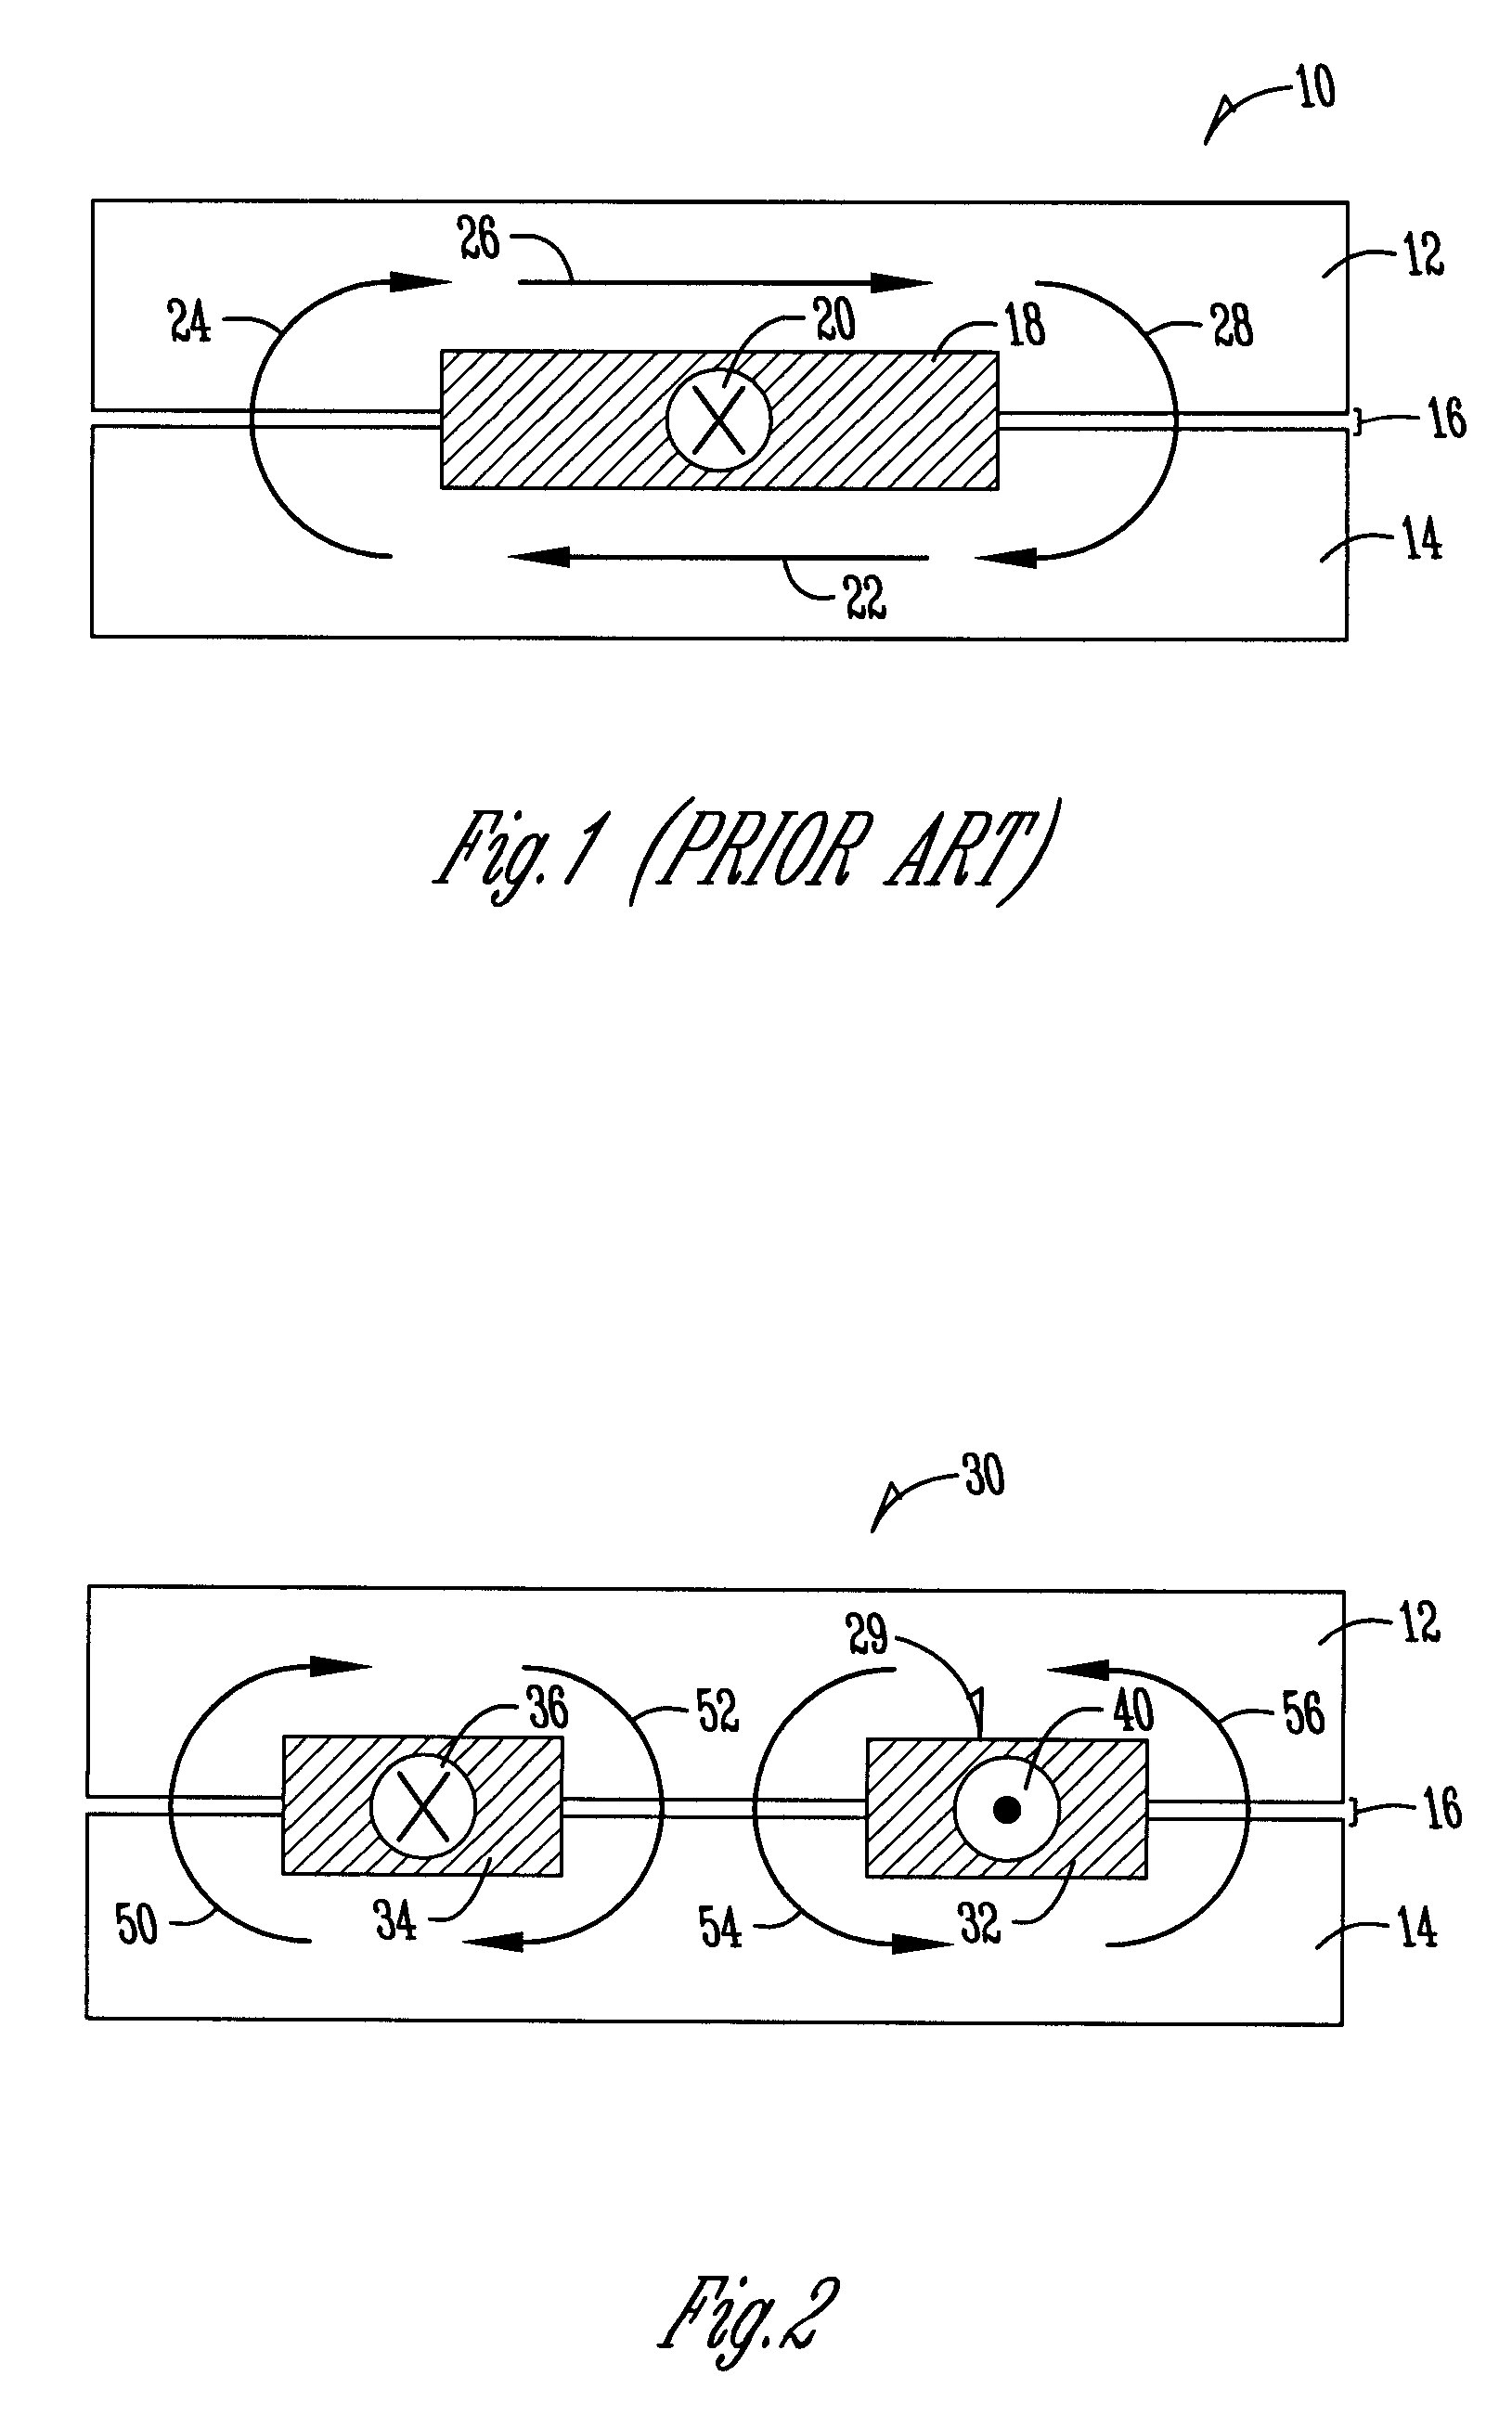 Flux channeled, high current inductor